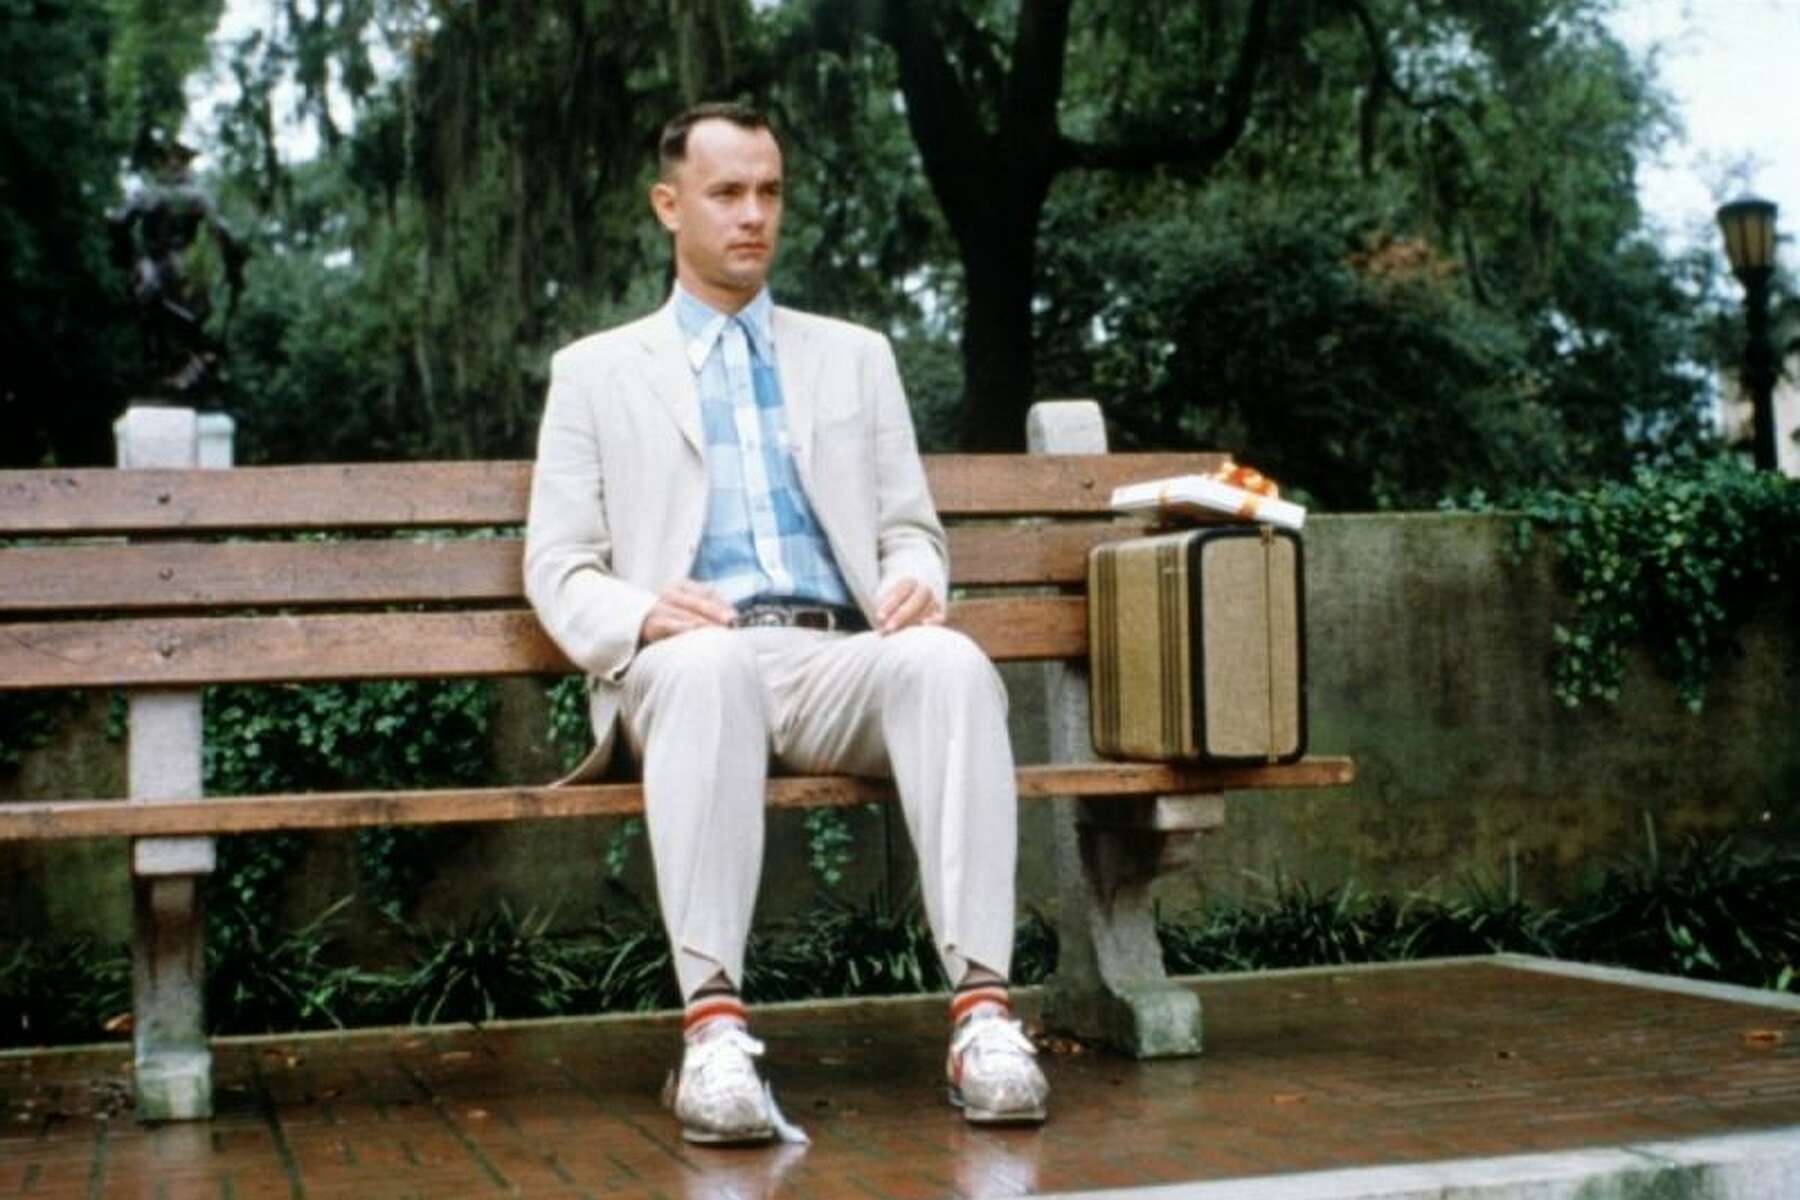 Fun facts about 'Forrest Gump' 23 years after its release in theaters